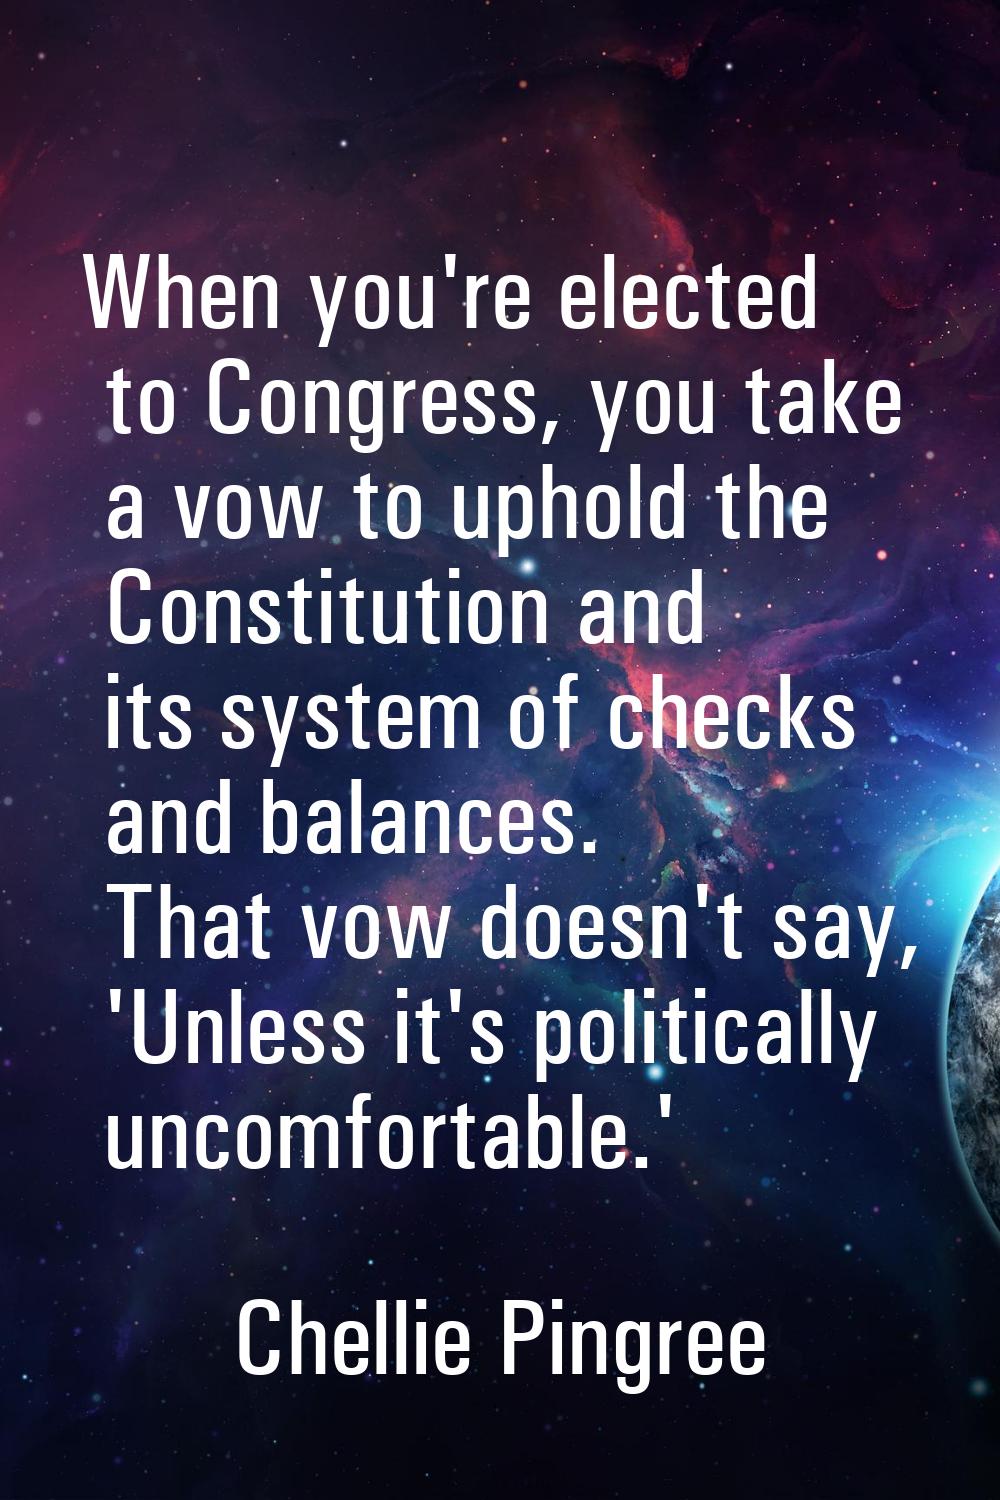 When you're elected to Congress, you take a vow to uphold the Constitution and its system of checks